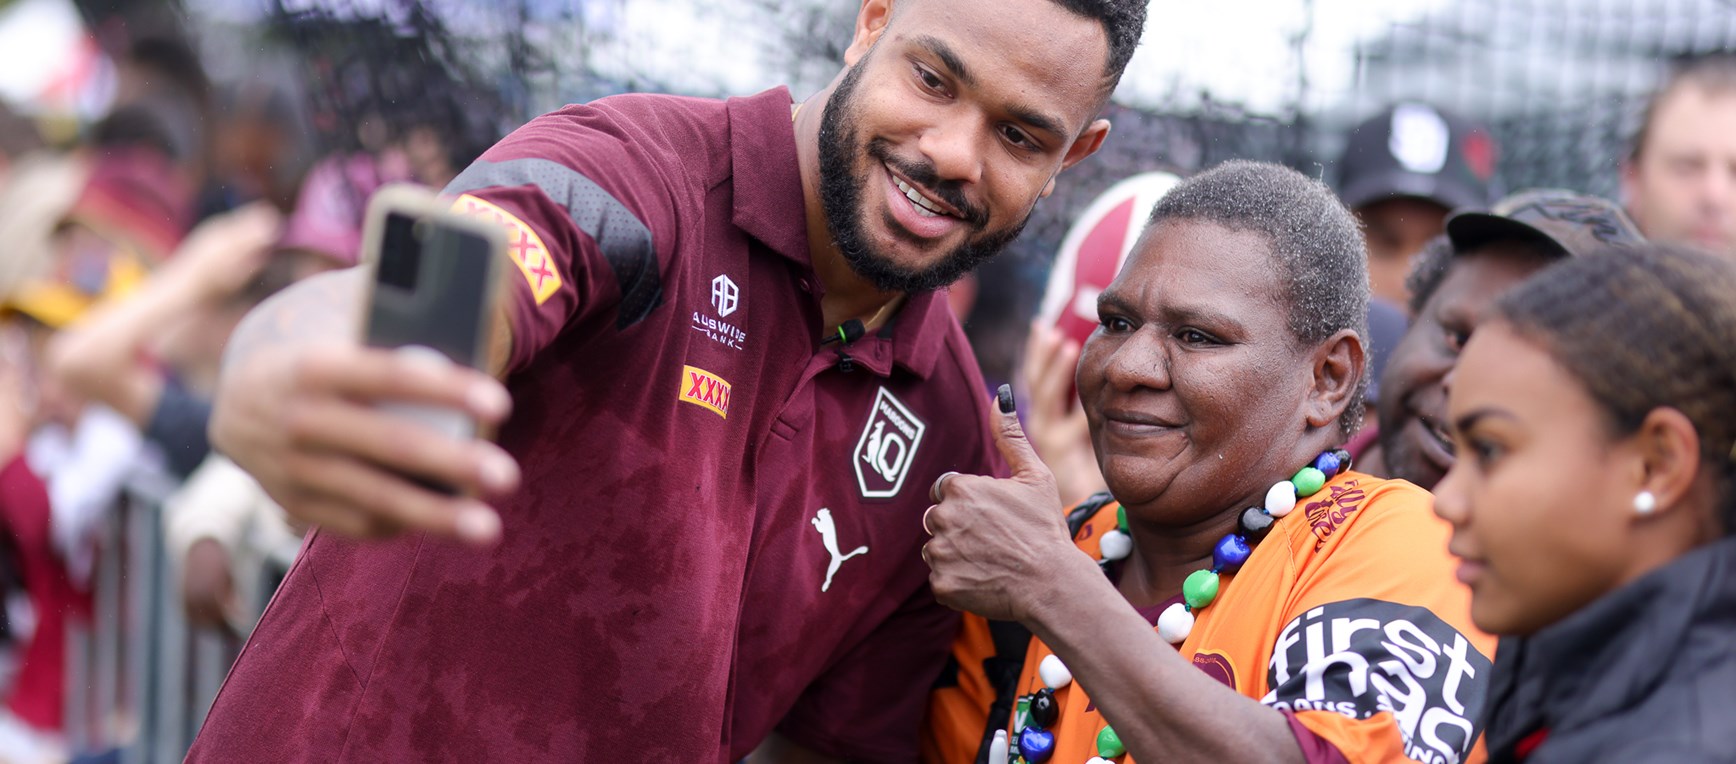 In pictures: Plenty of smiles at Maroons fan day